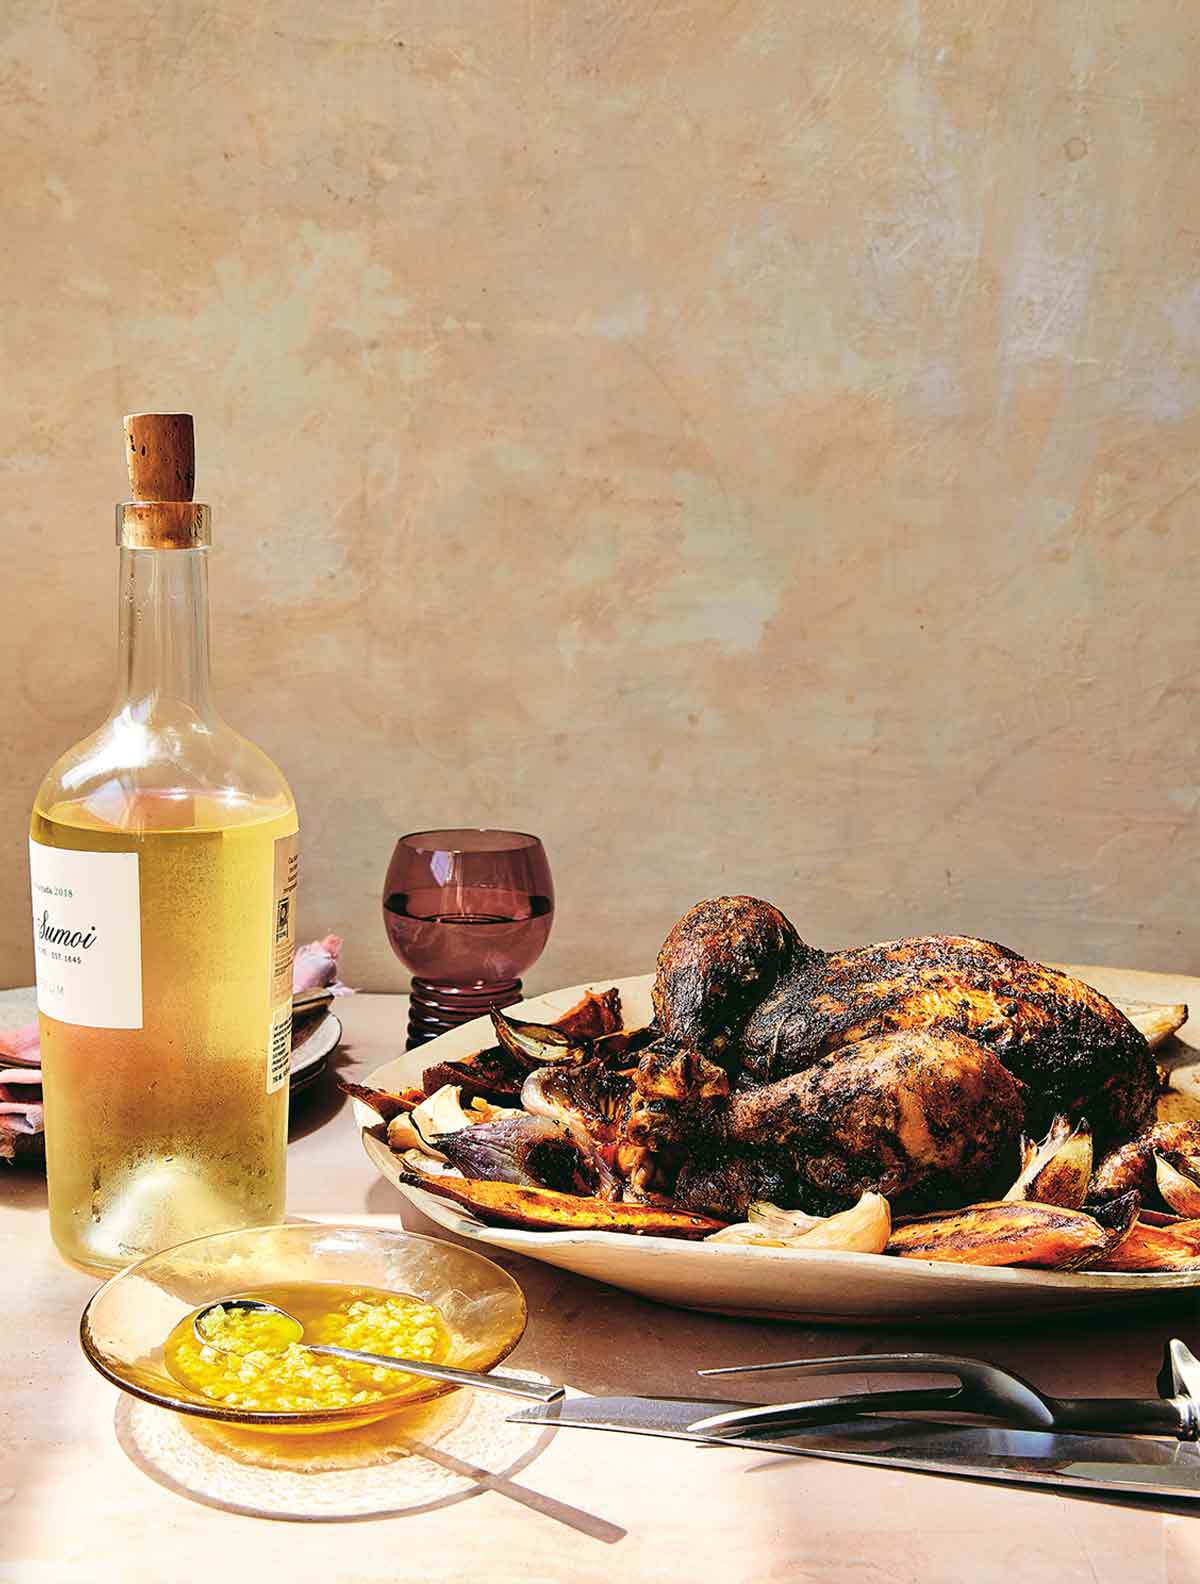 A serving platter topped with baharat roast chicken with sweet potatoes and a bowl of preserved lemon oil on the side along with a bottle of wine and a wine goblet.